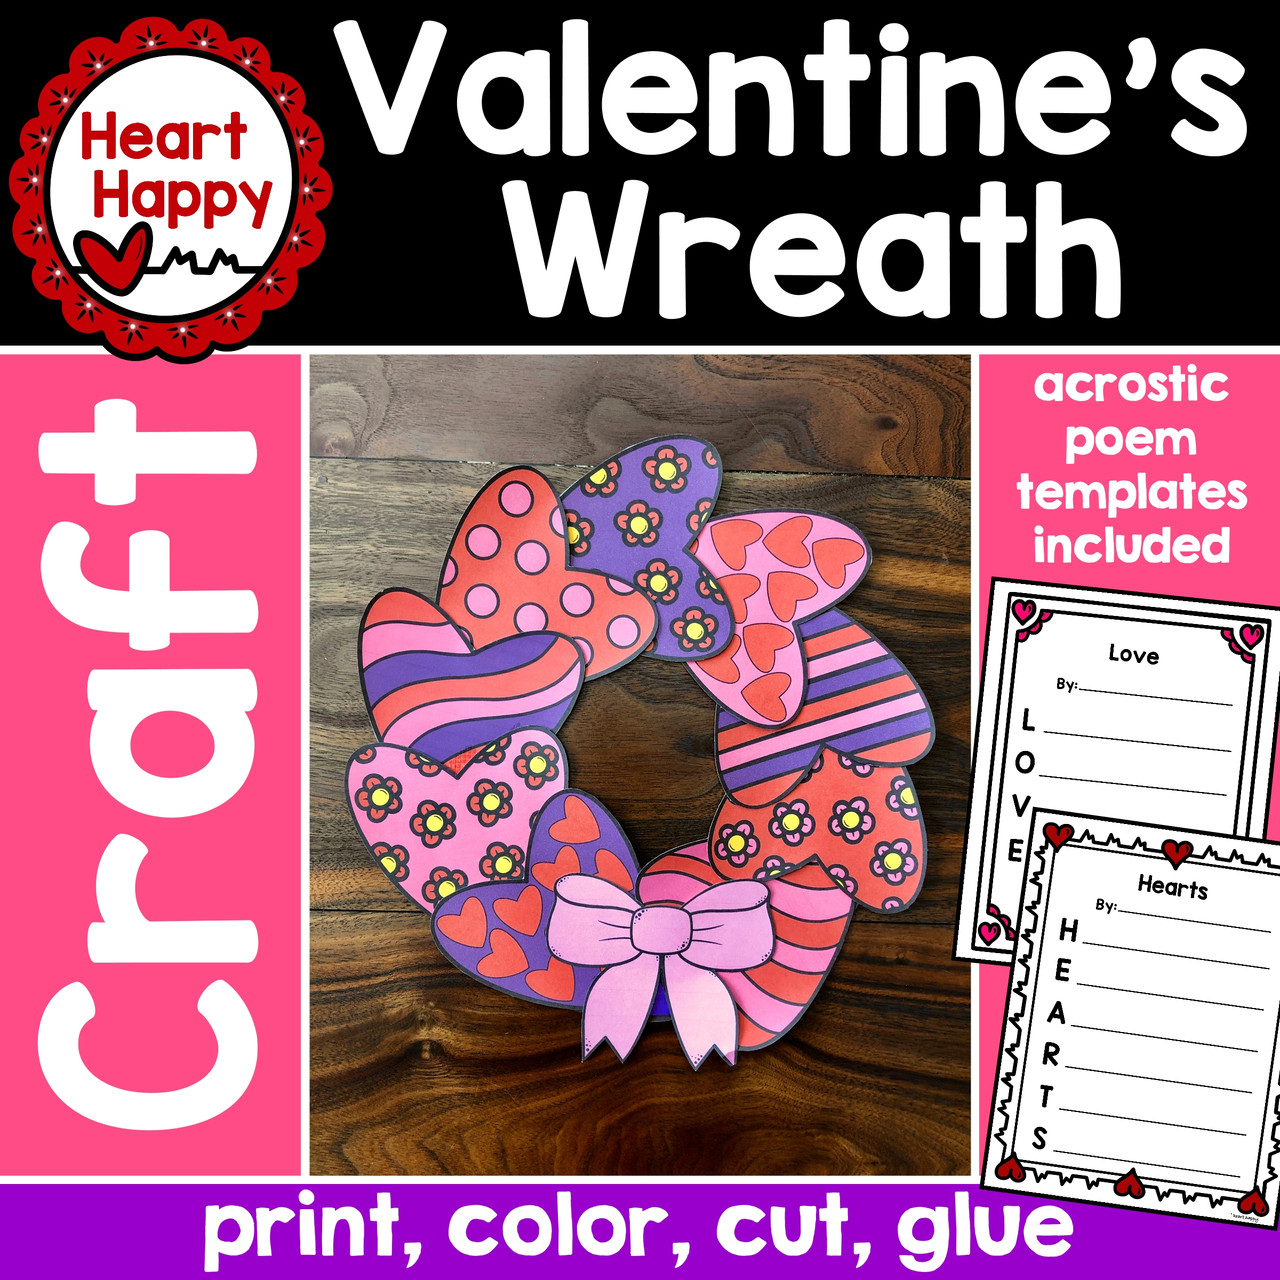 Valentines heart wreath craft with acrostic poem templates